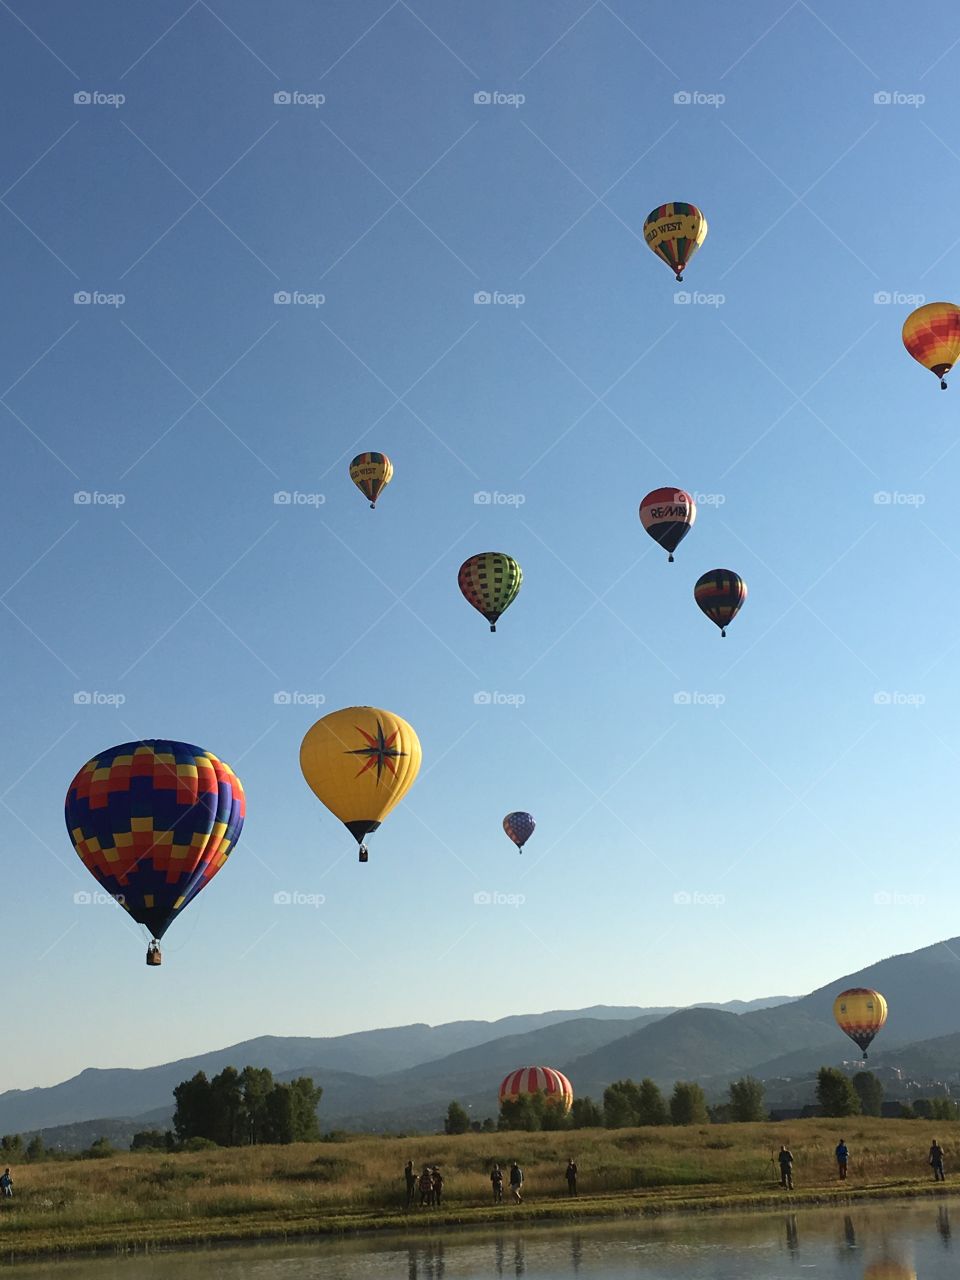 Steamboat Springs, Colorado  Balloon Rodeo (1)

